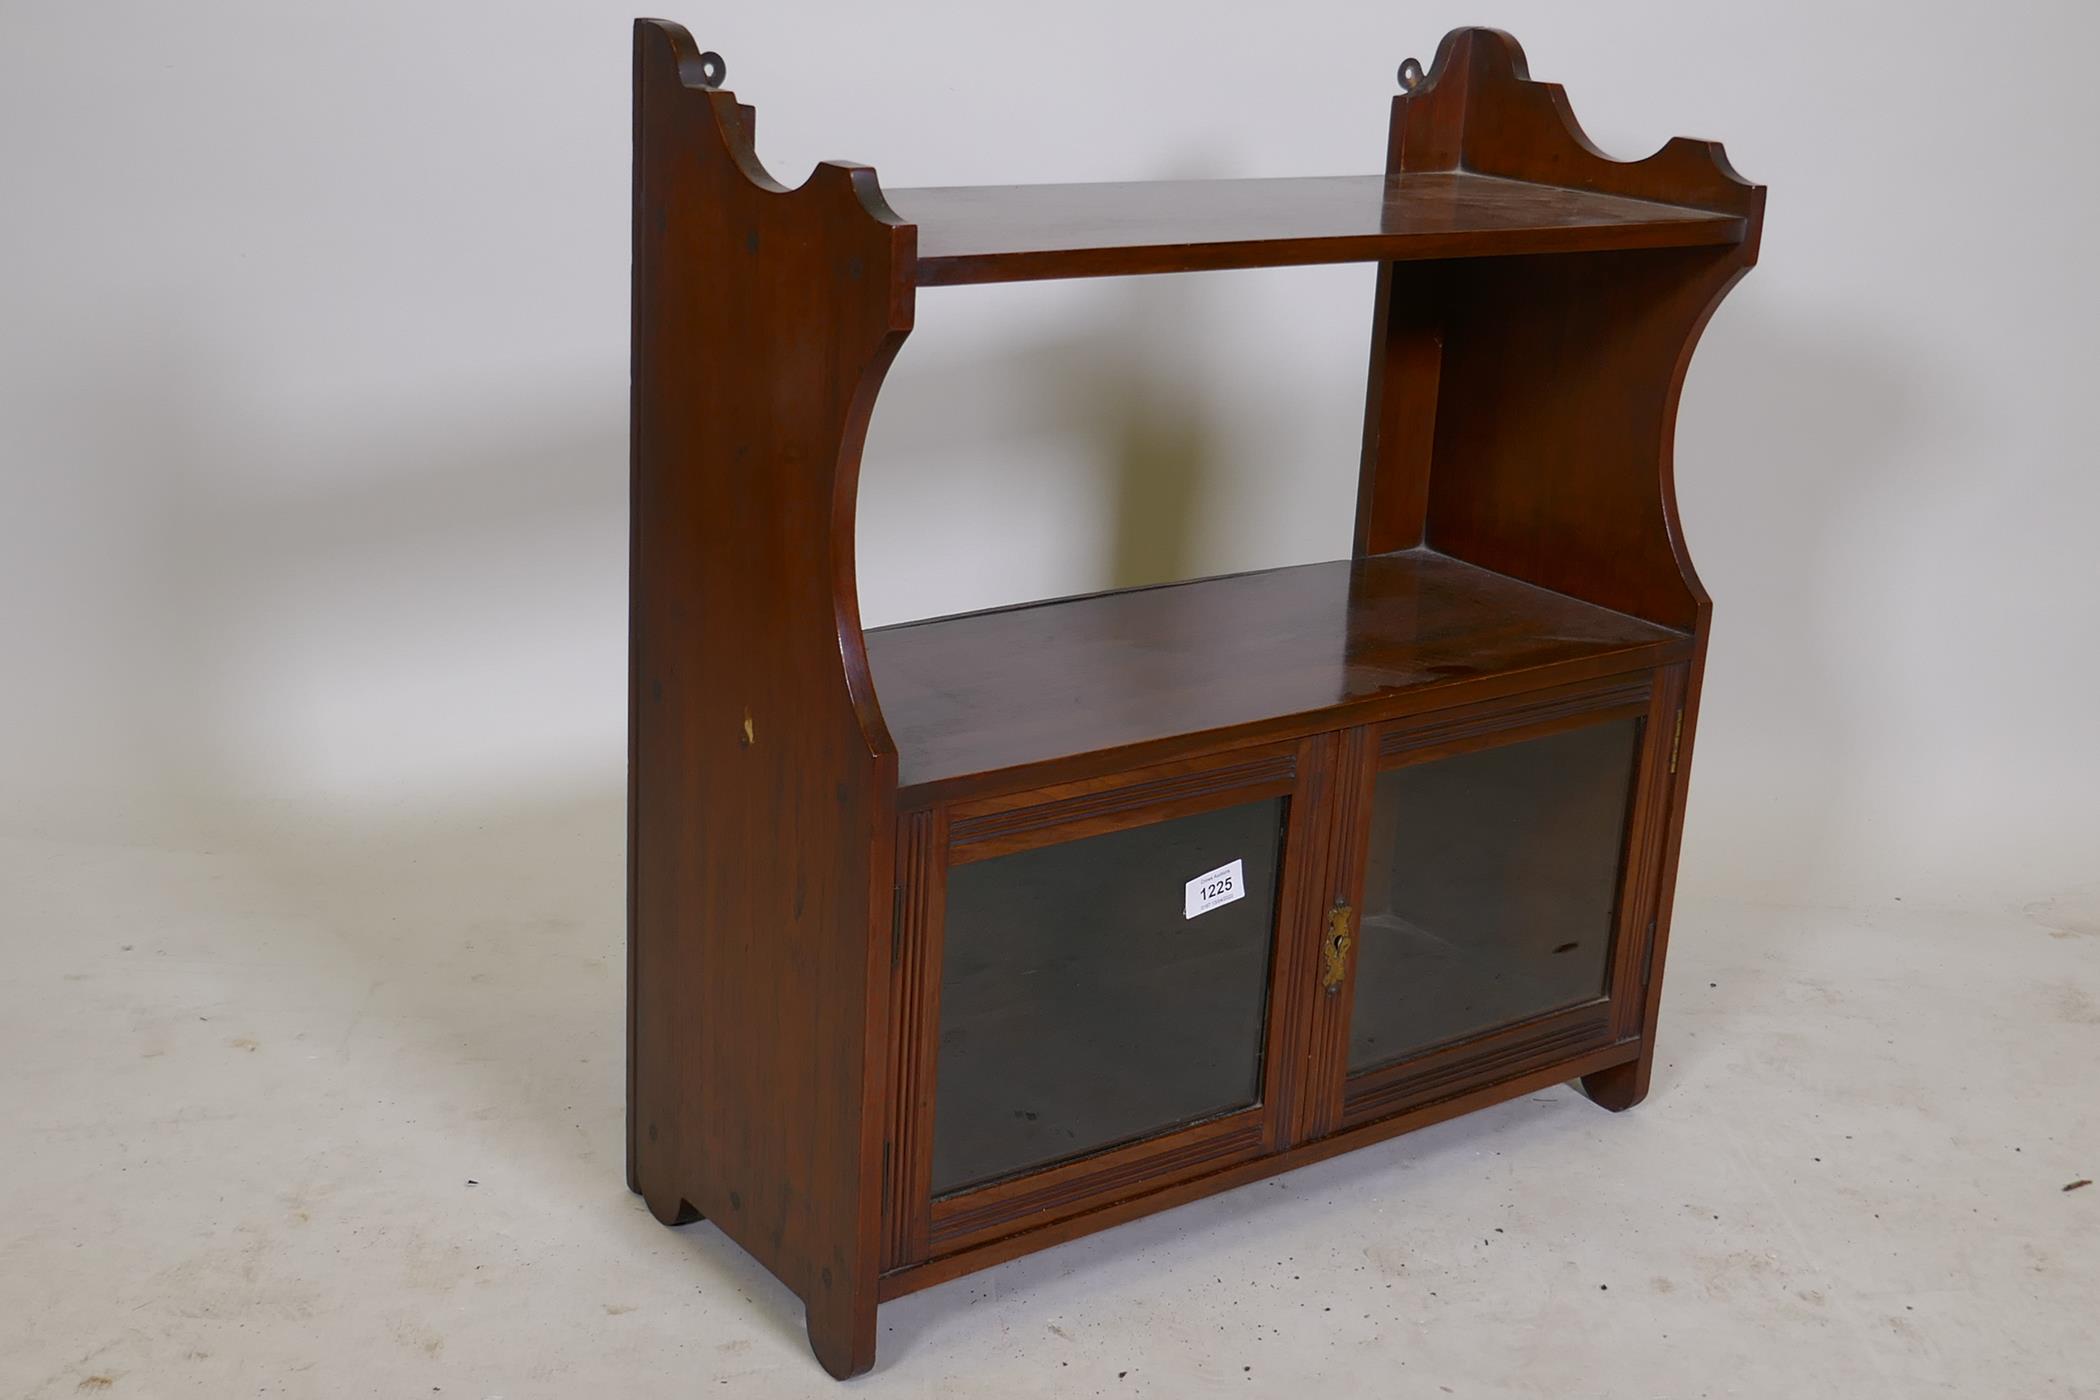 A Victorian mahogany hanging shelf with two glazed doors, 23" x 10" x 26" - Image 2 of 2